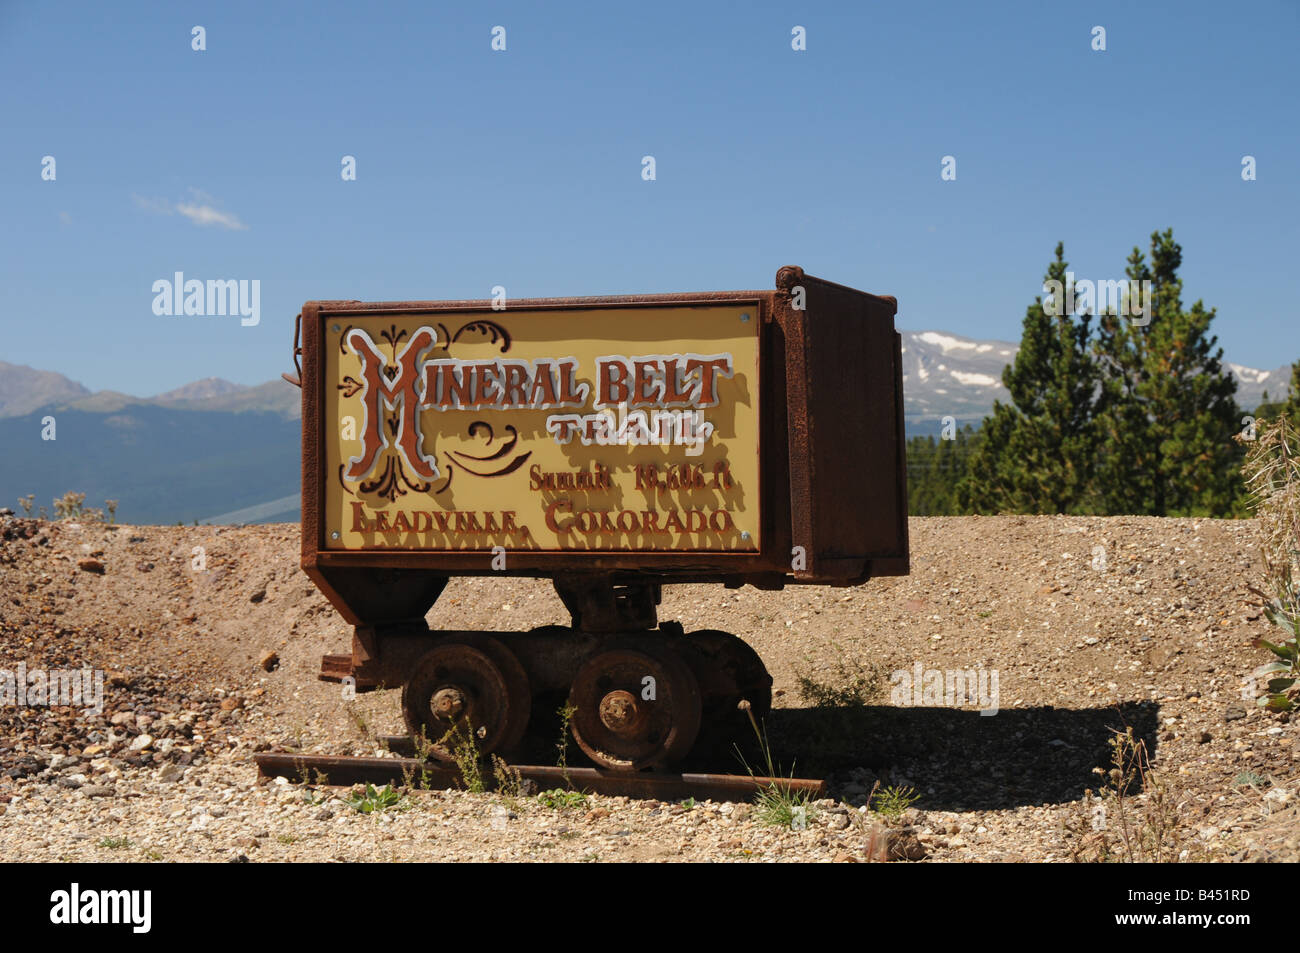 An old mining truck used to promote The Mineral Belt Trail, Leadville, Colorado. Stock Photo